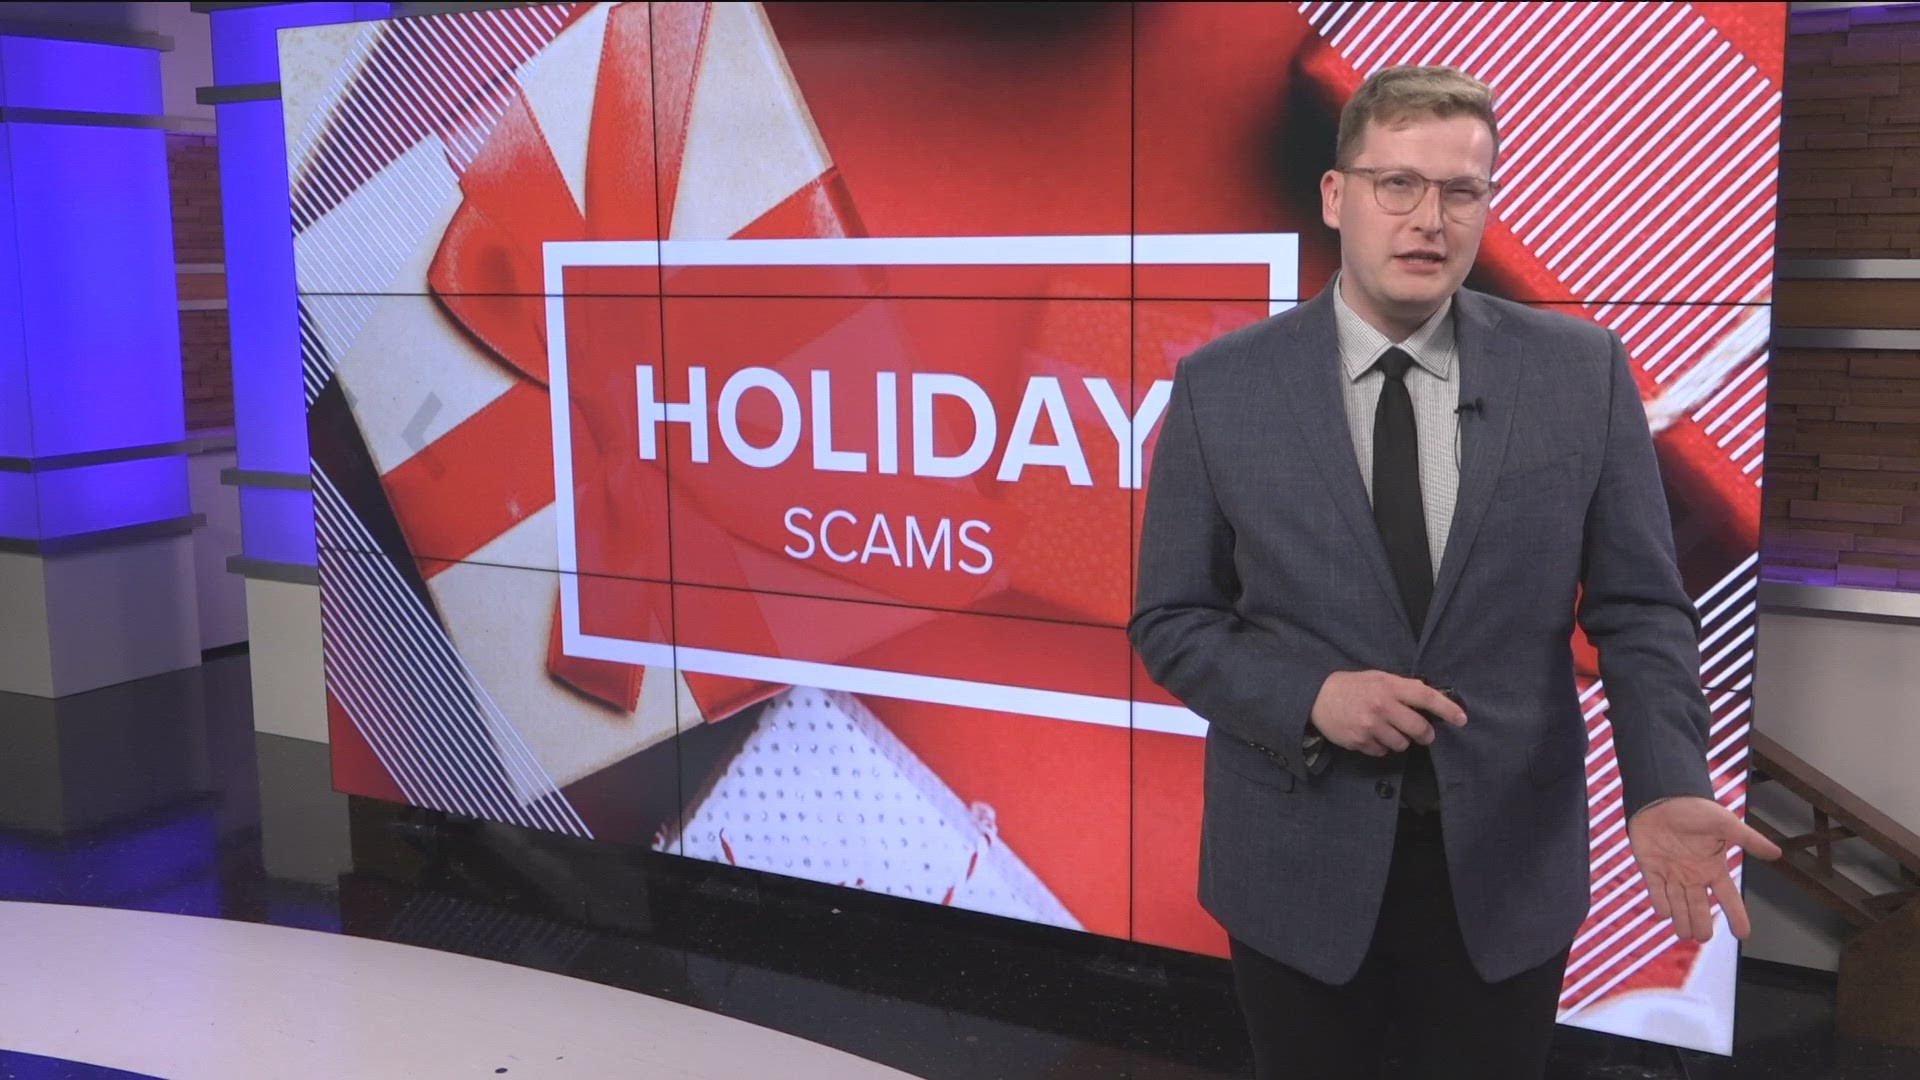 We spoke with the Better Business Bureau over what people need to watch for from scammers as the holidays approach.